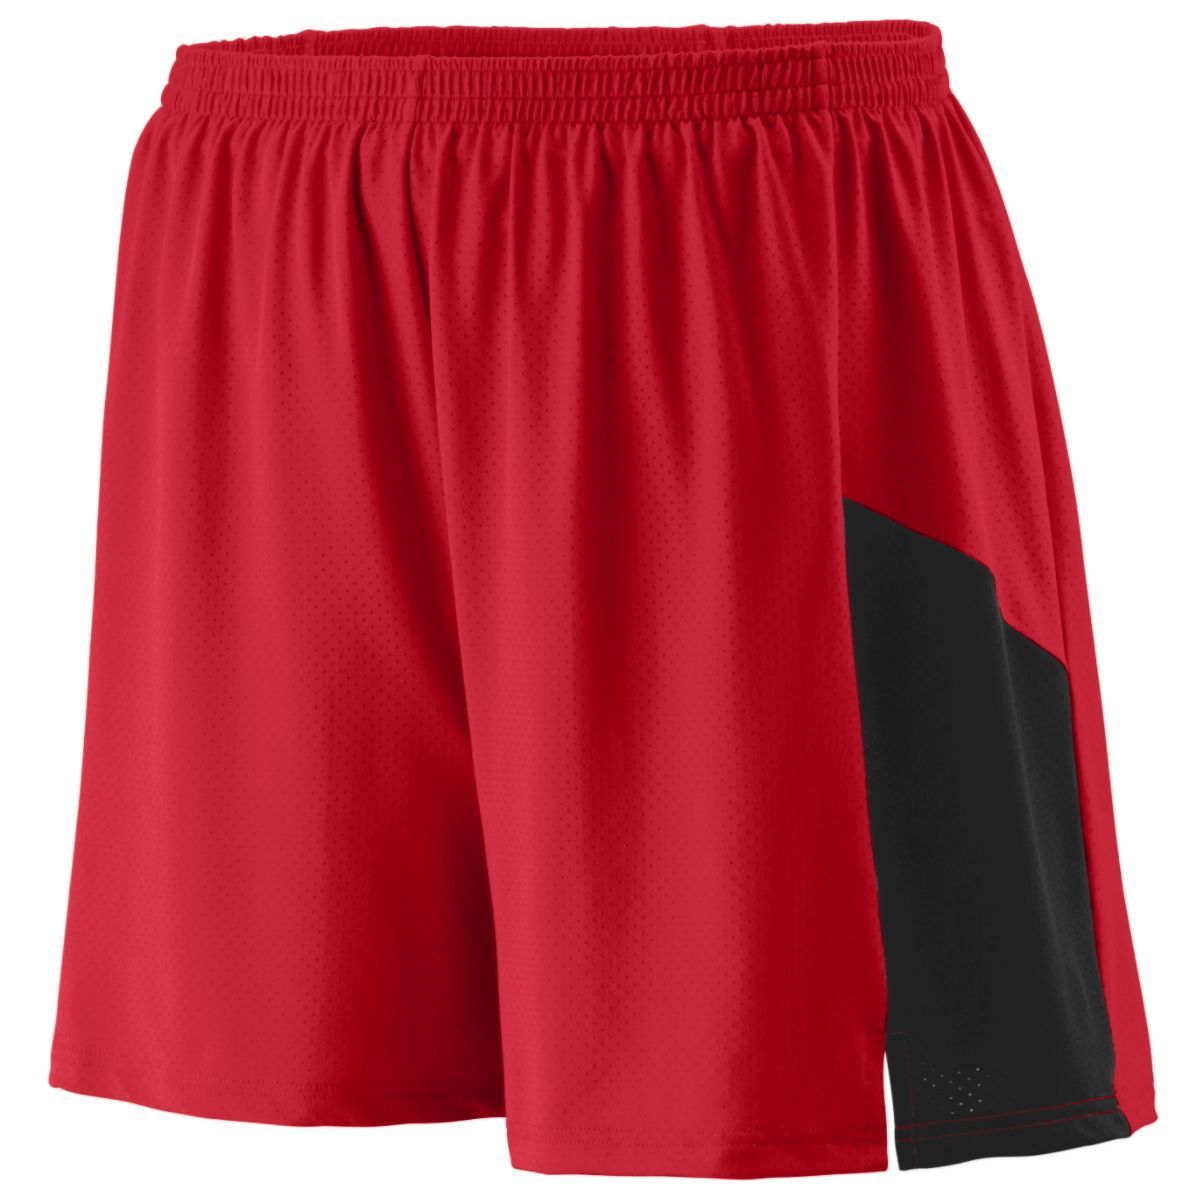 Augusta Sportswear Sprint Shorts in Red/Black  -Part of the Adult, Adult-Shorts, Augusta-Products, Track-Field product lines at KanaleyCreations.com